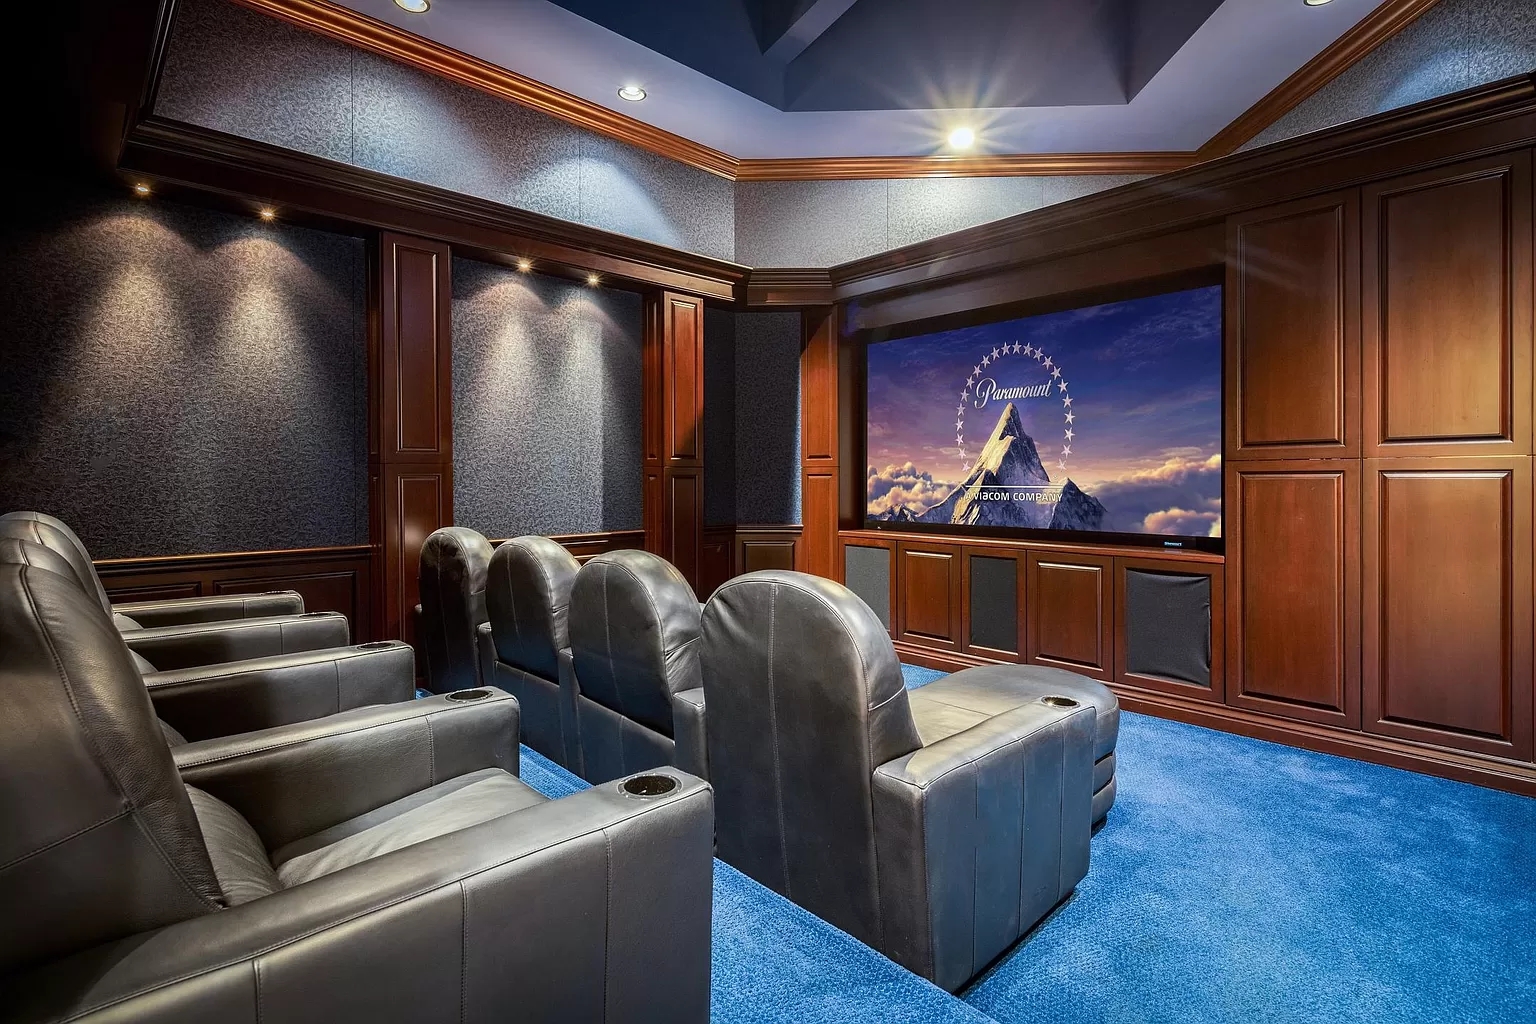 Red Home Theater Room: Picture Perfect Entertainment